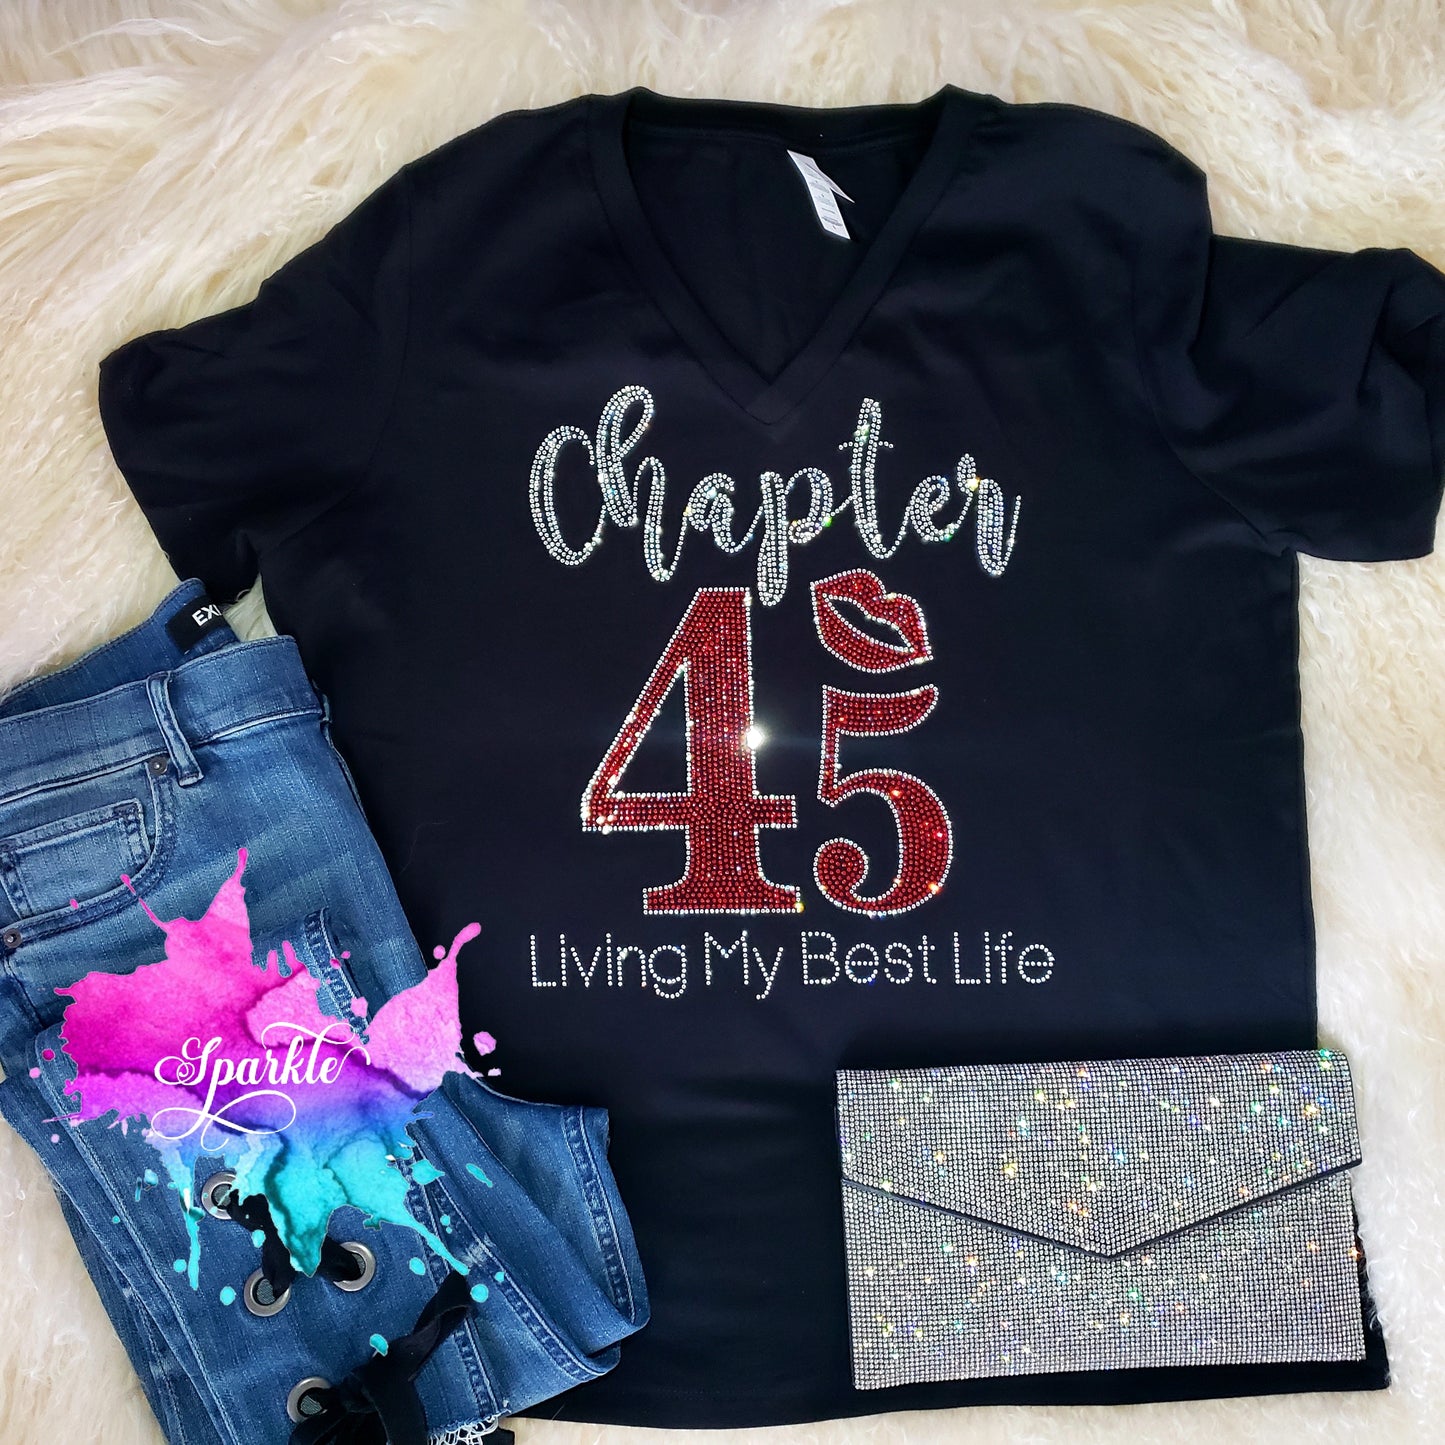 Chapter 45 Crystallized Tee